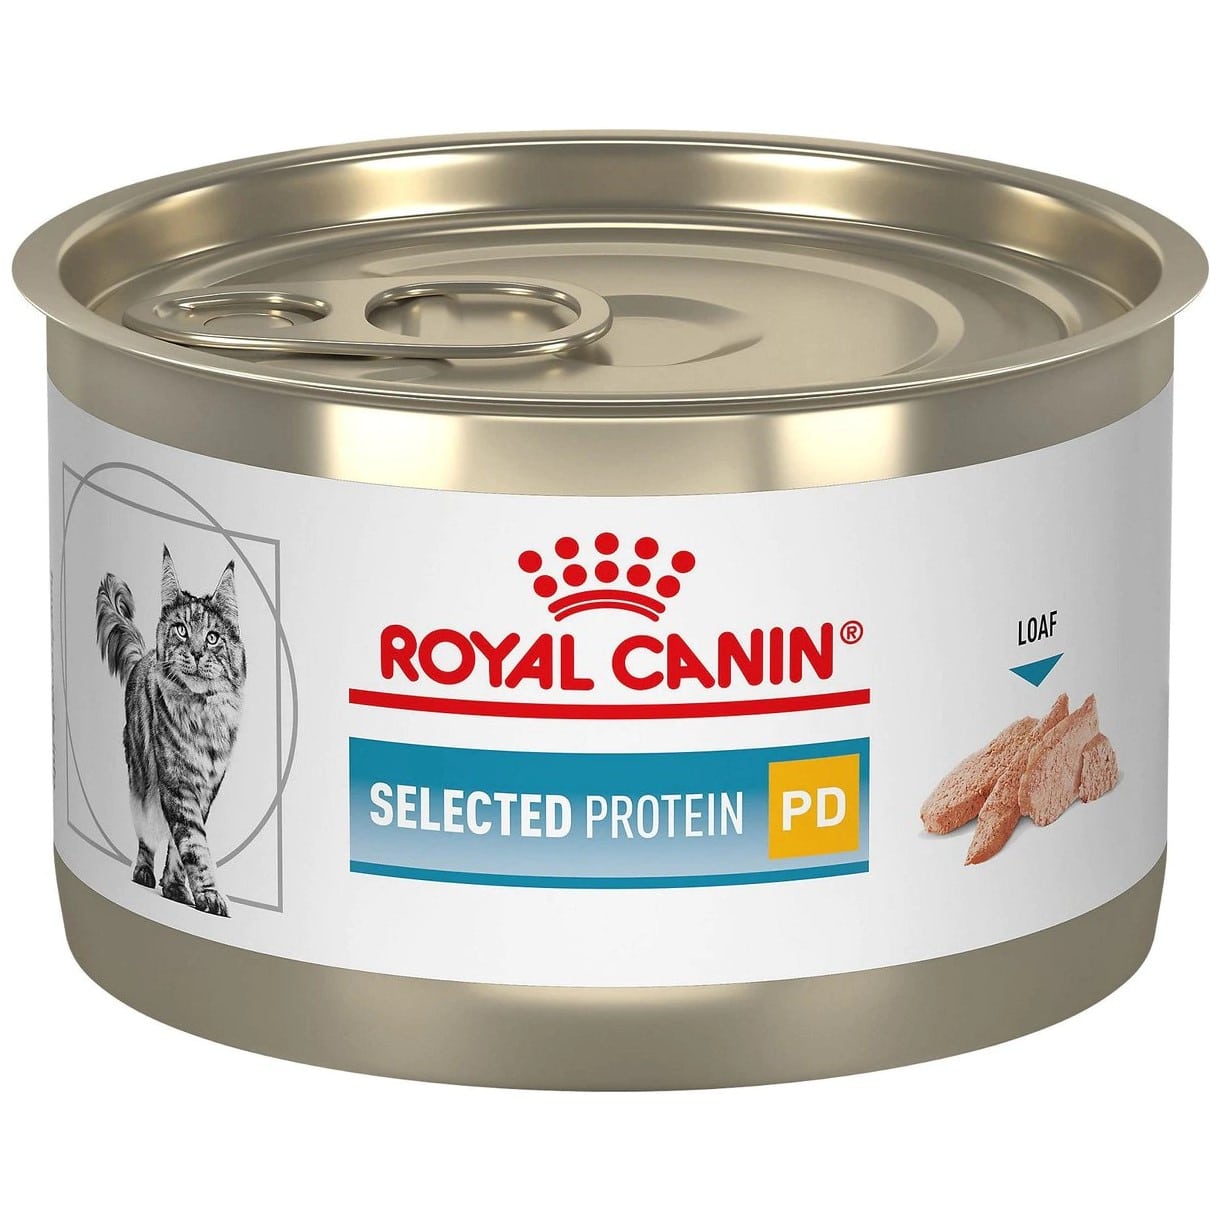 Royal Canin Veterinary Diet Adult Selected Protein PD Loaf Canned Cat Food